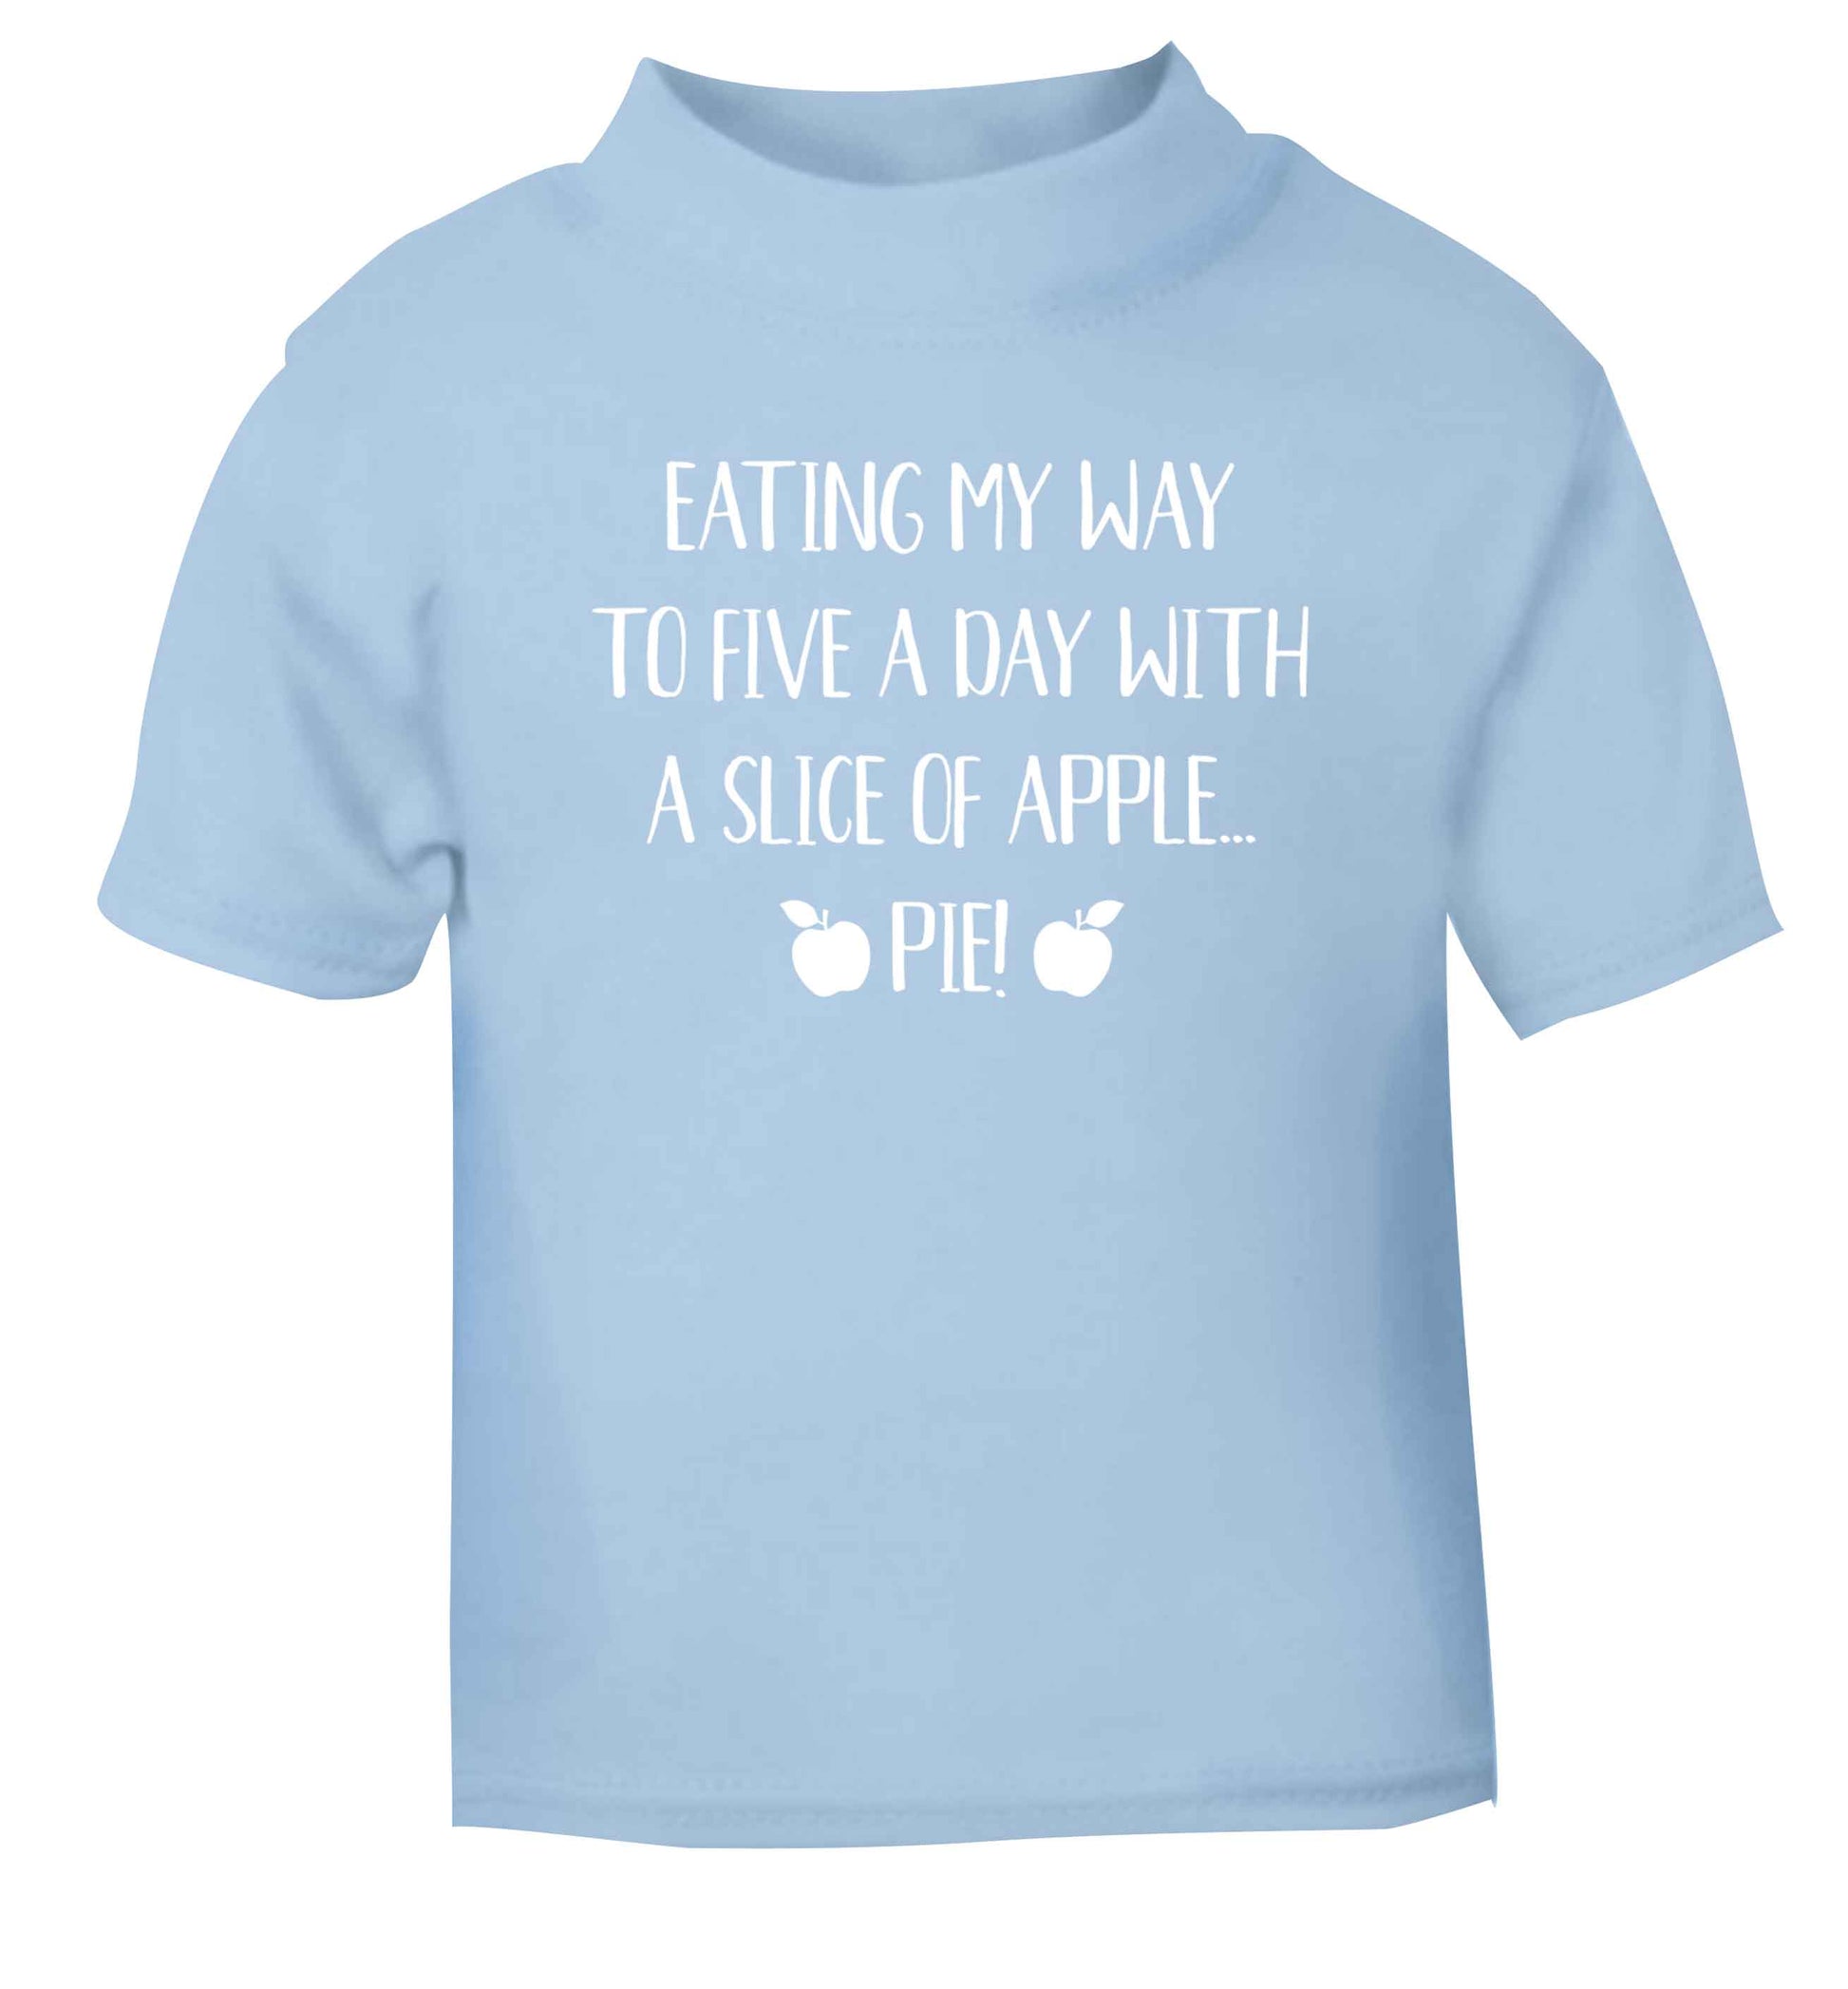 Eating my way to five a day with a slice of apple pie light blue Baby Toddler Tshirt 2 Years